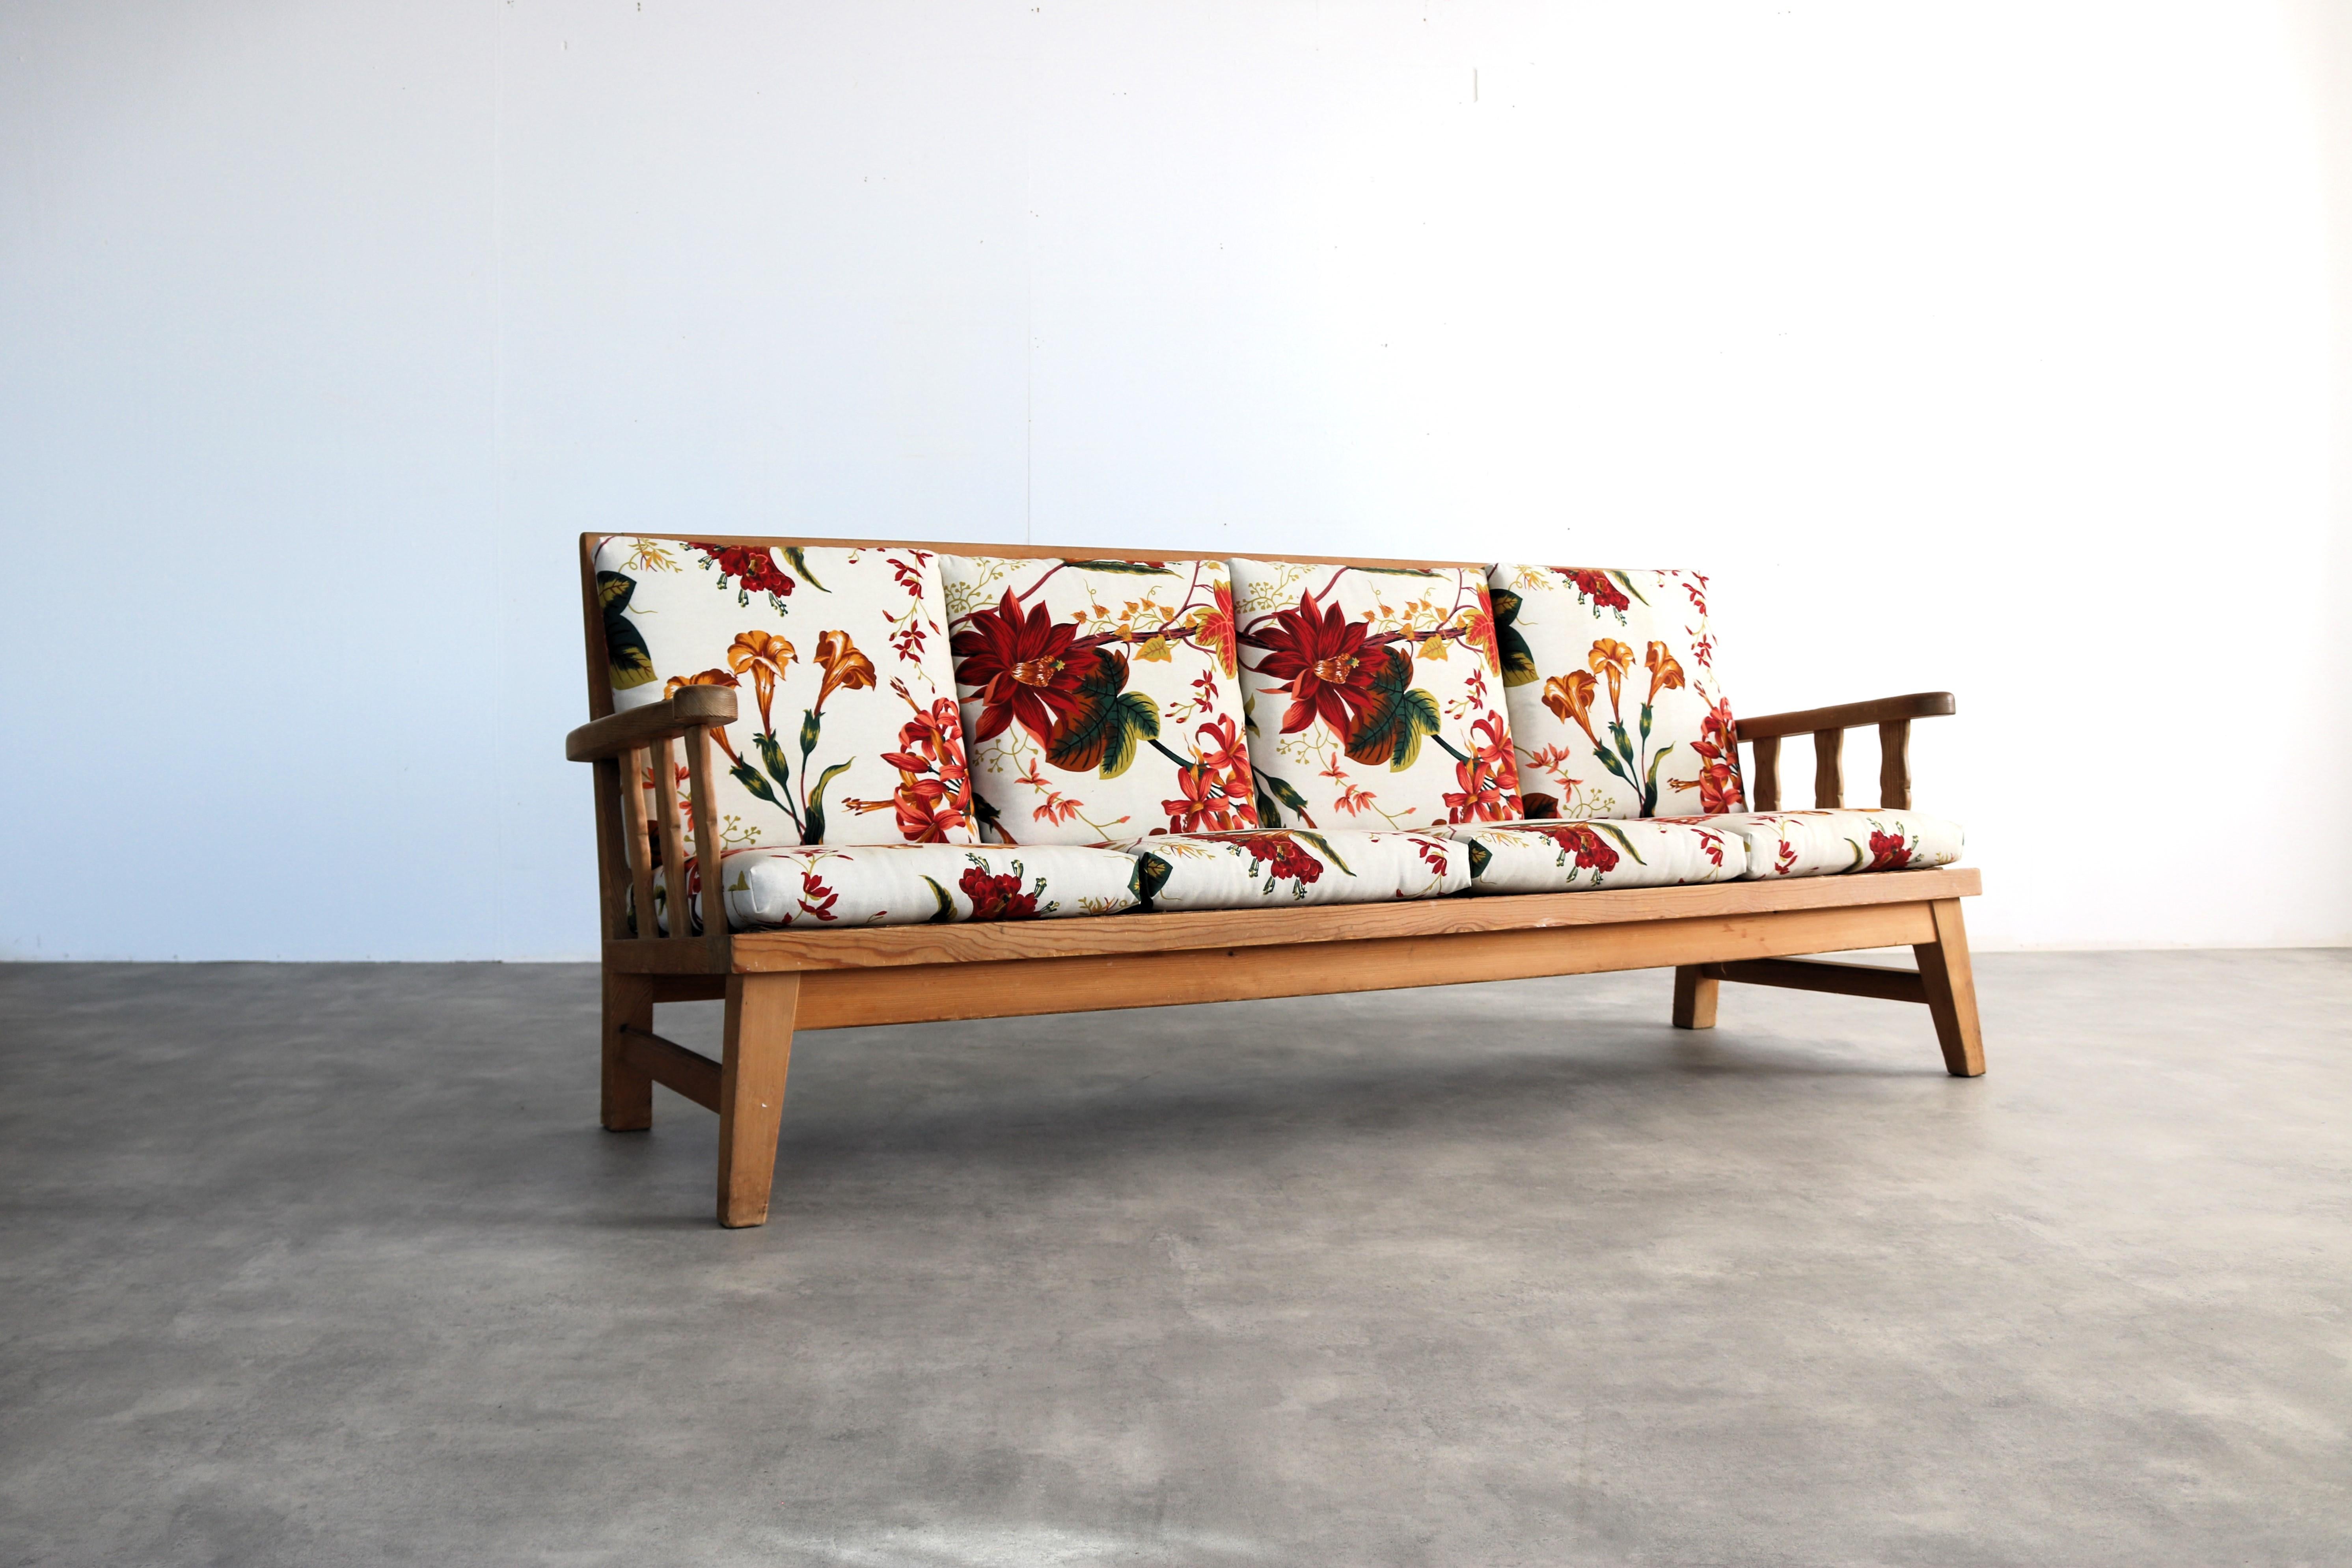 vintage sofa | sofa | 1950s | Sweden

period | 1950s
design | Krogenaes Mobler | Sweden
condition | good | light signs of use
size | 85 x 215 x 72 (hxwxd) seat height 43;

details | pine; textile;

article number | 2178